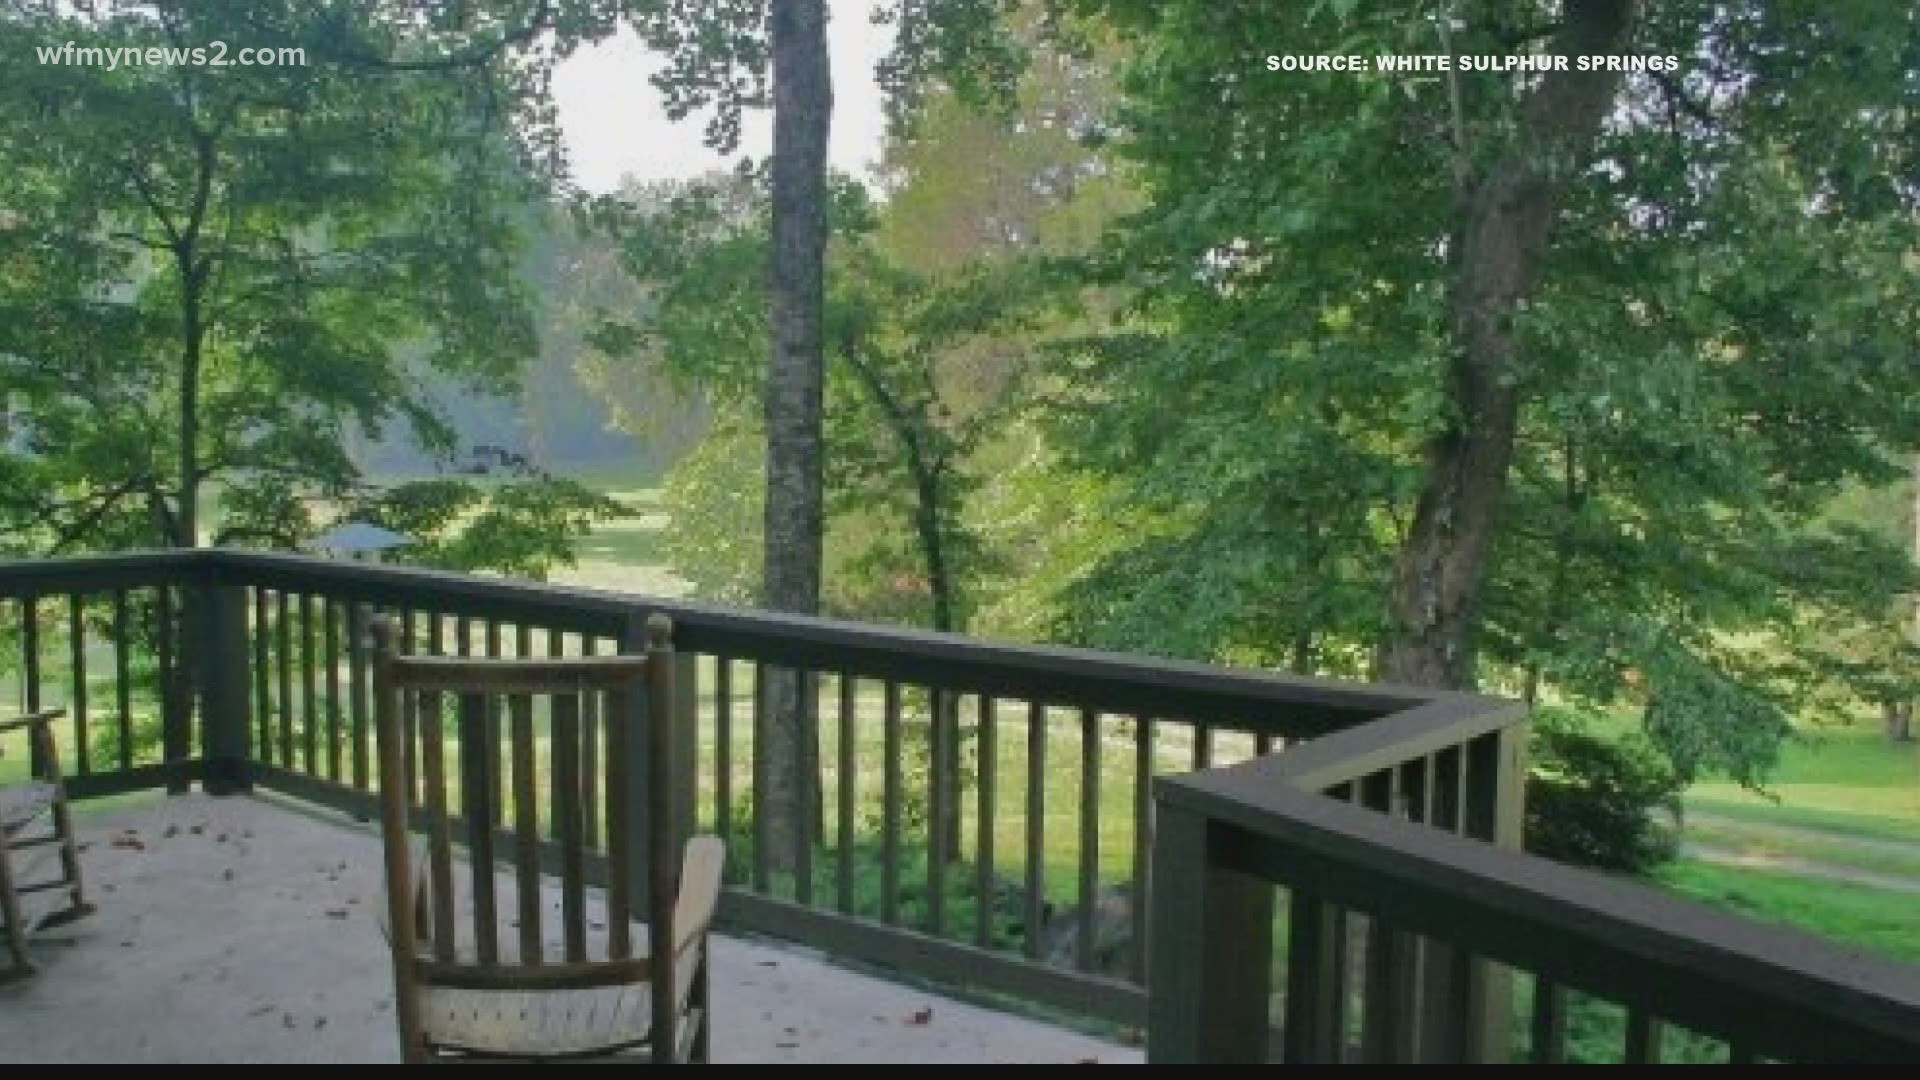 More people are disconnecting and enjoying time away at White Sulphur Springs in Mount Airy.